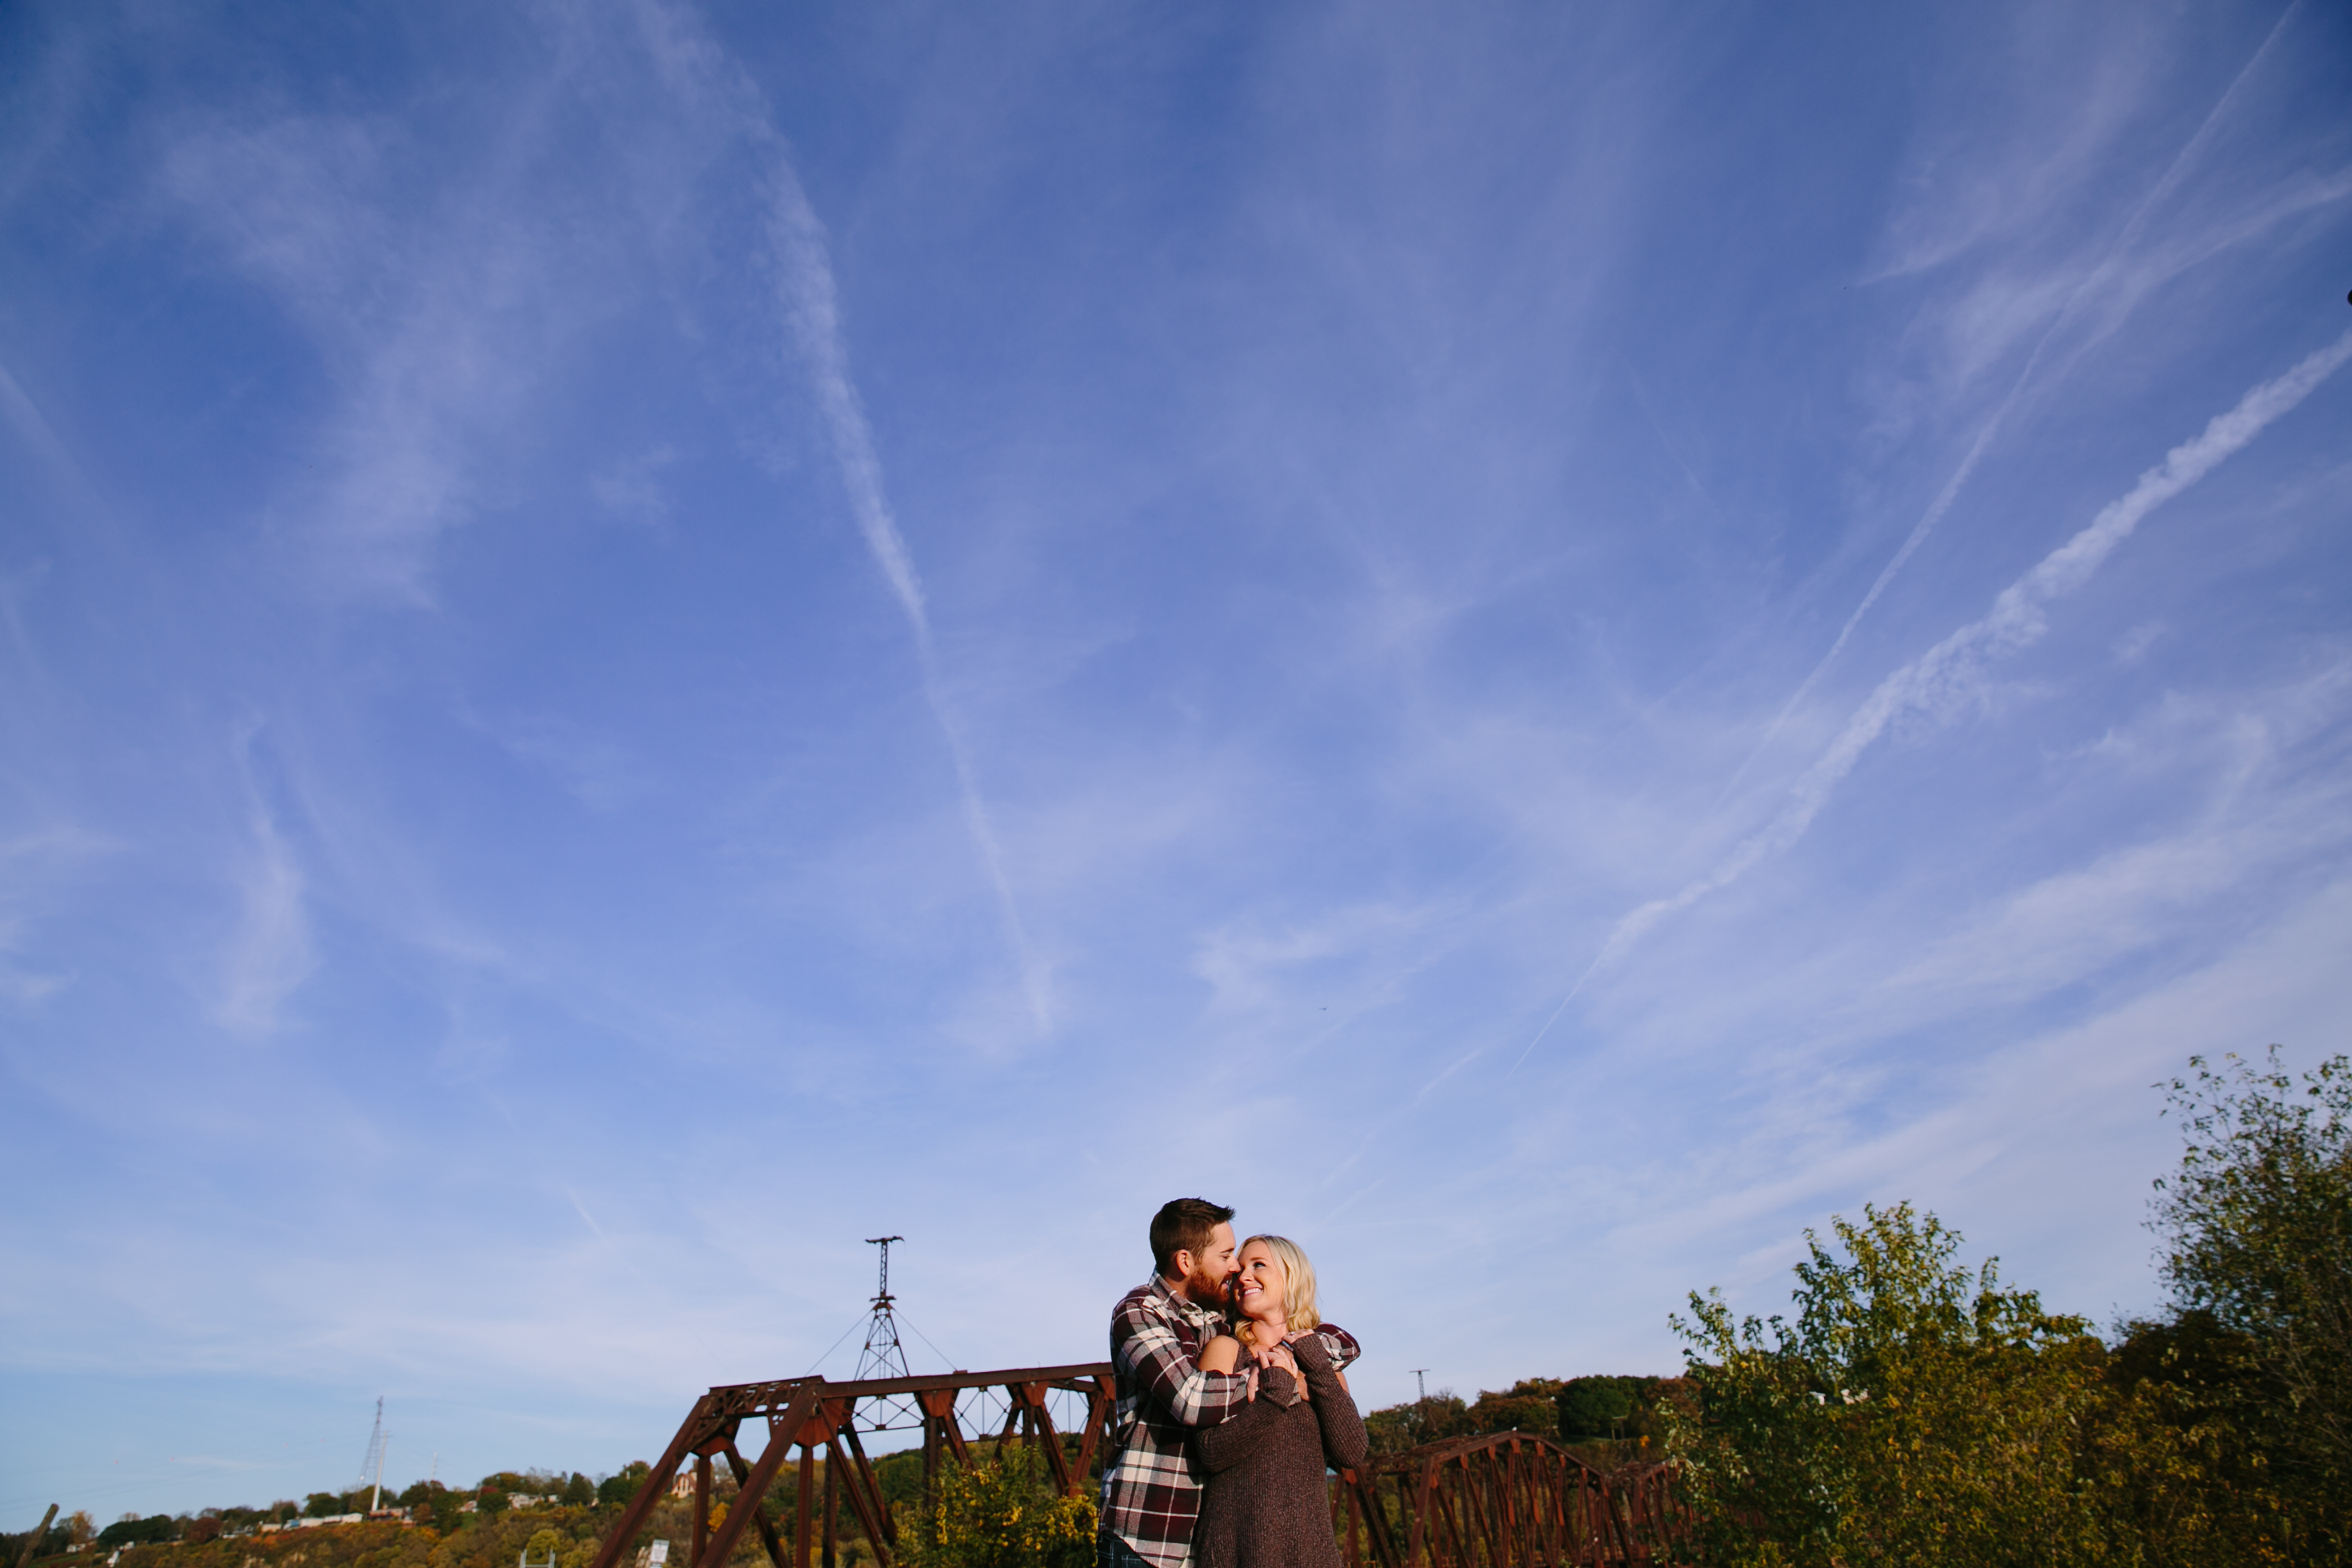 engagement photos by catherine furlin photography at stone cliff winery